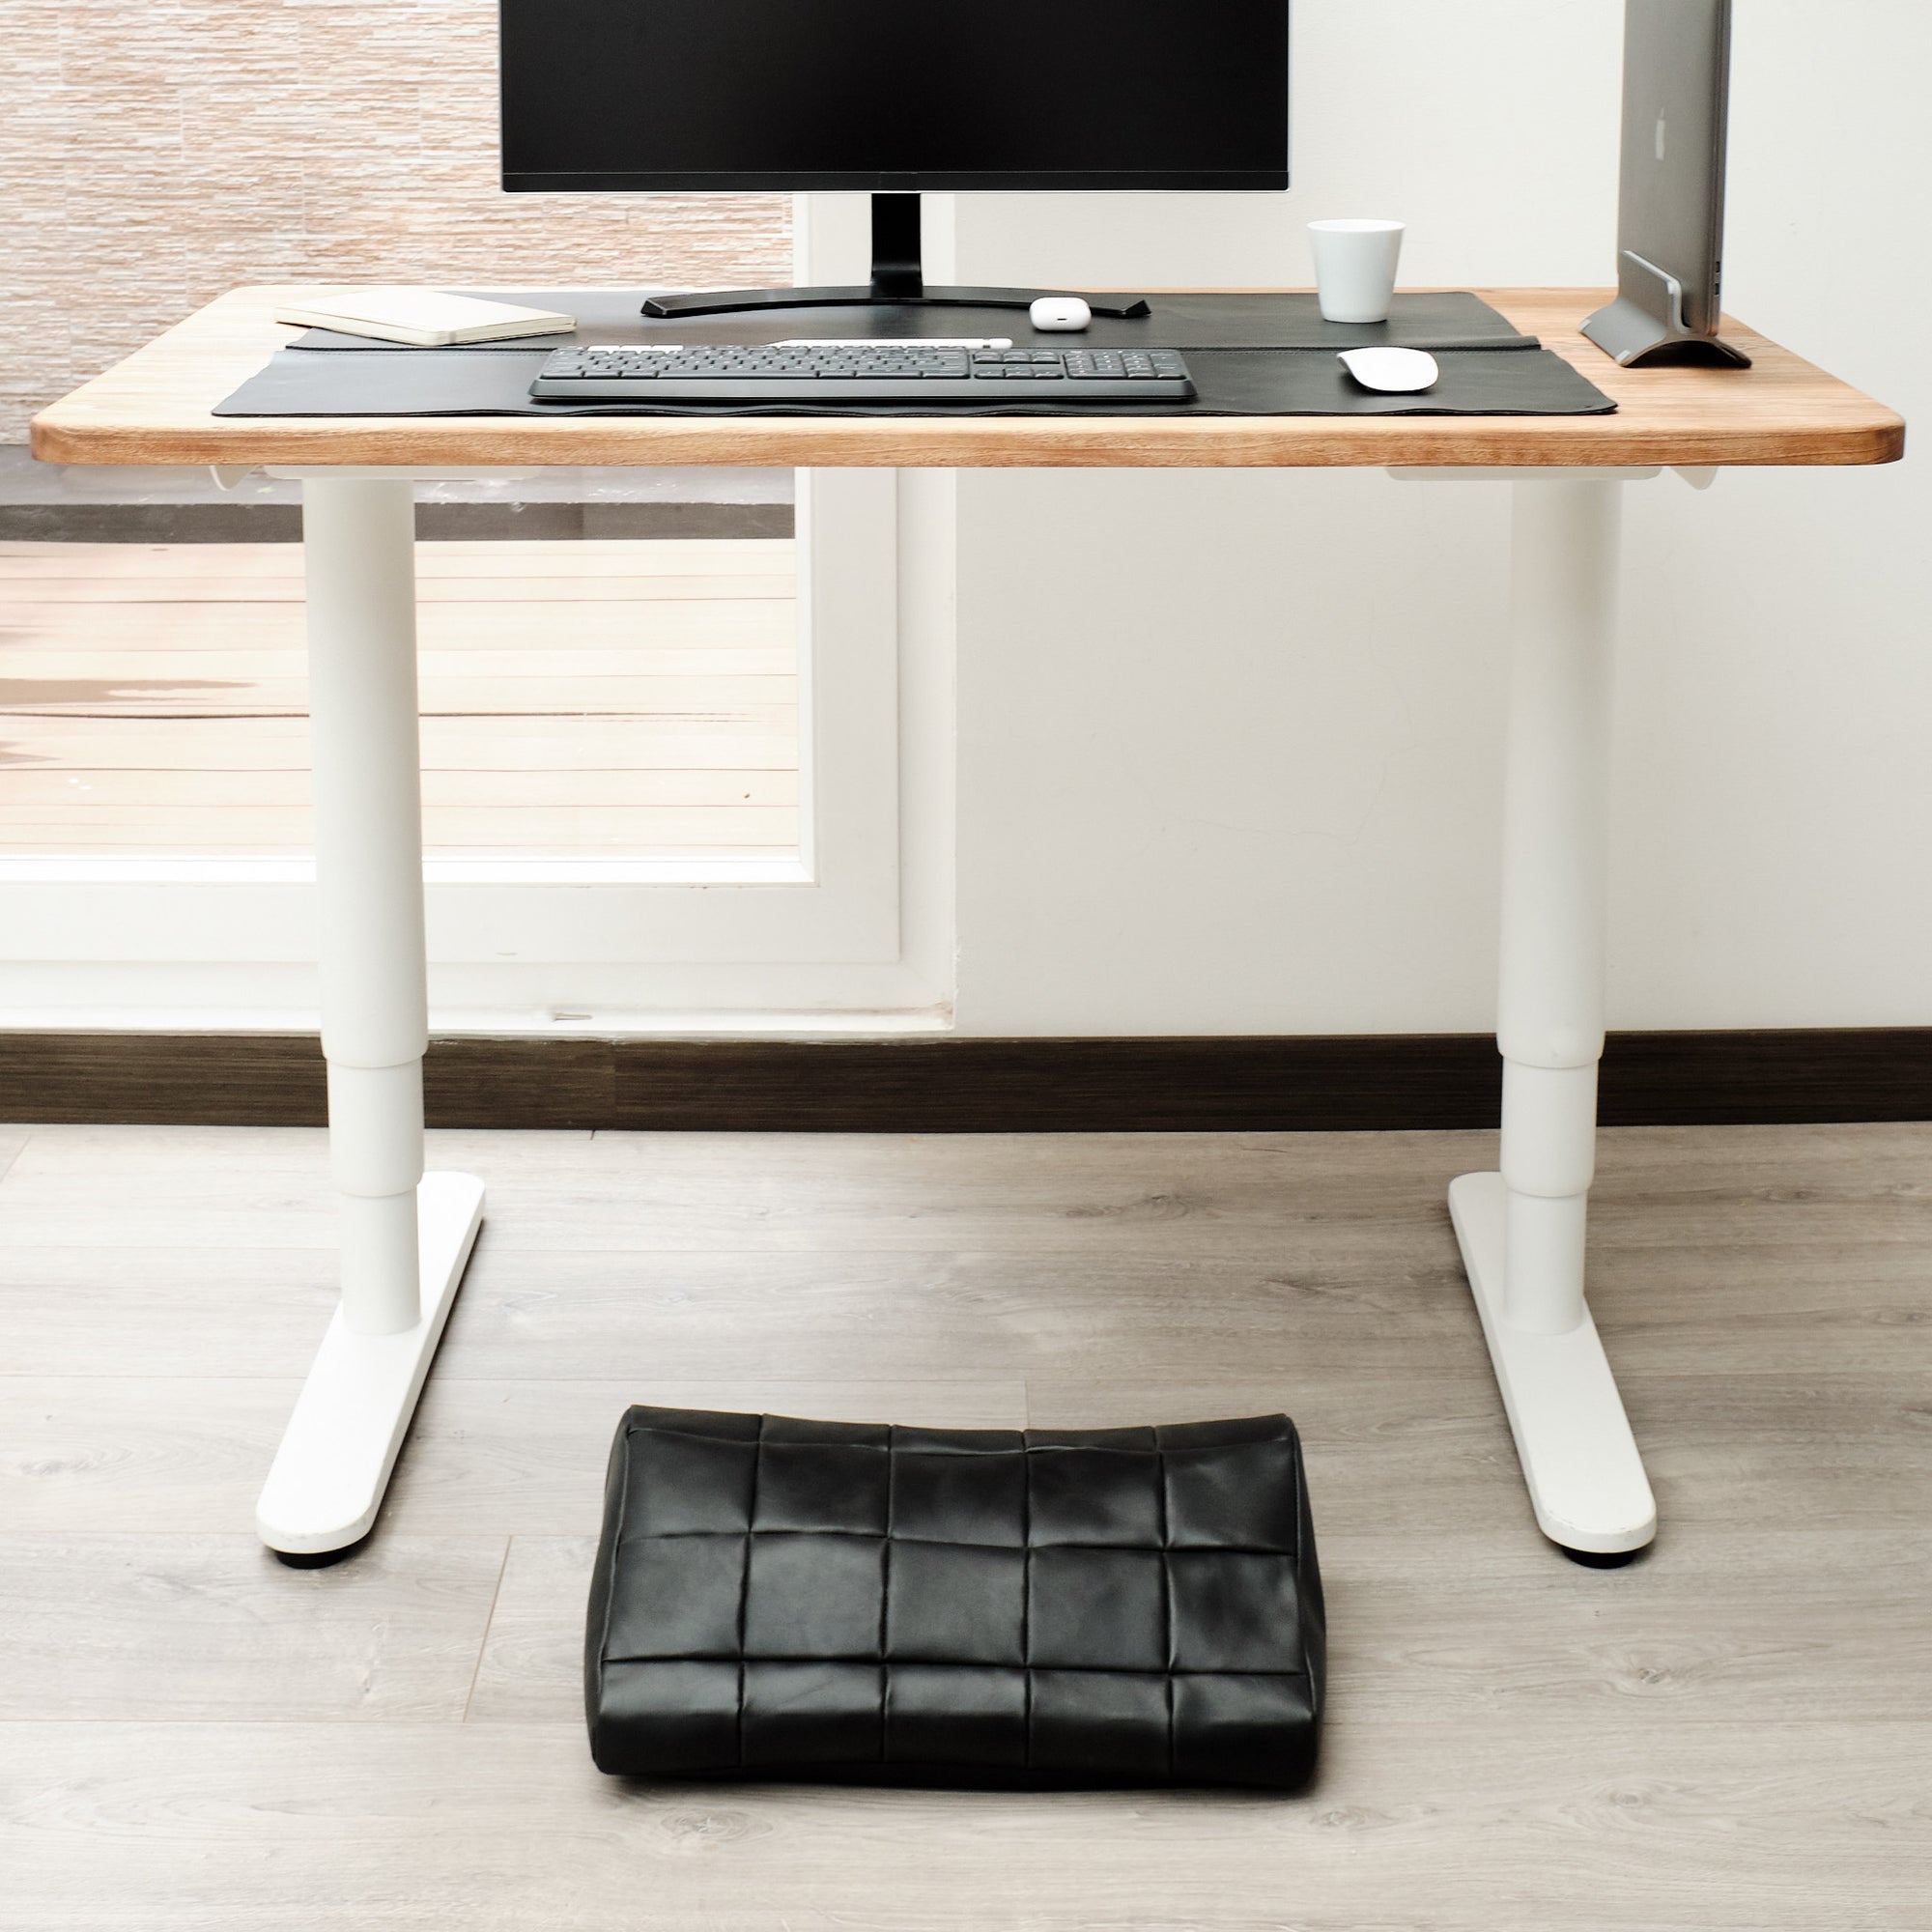 Home office. Ergonomic under desk footrest cover in black by Capra Leather